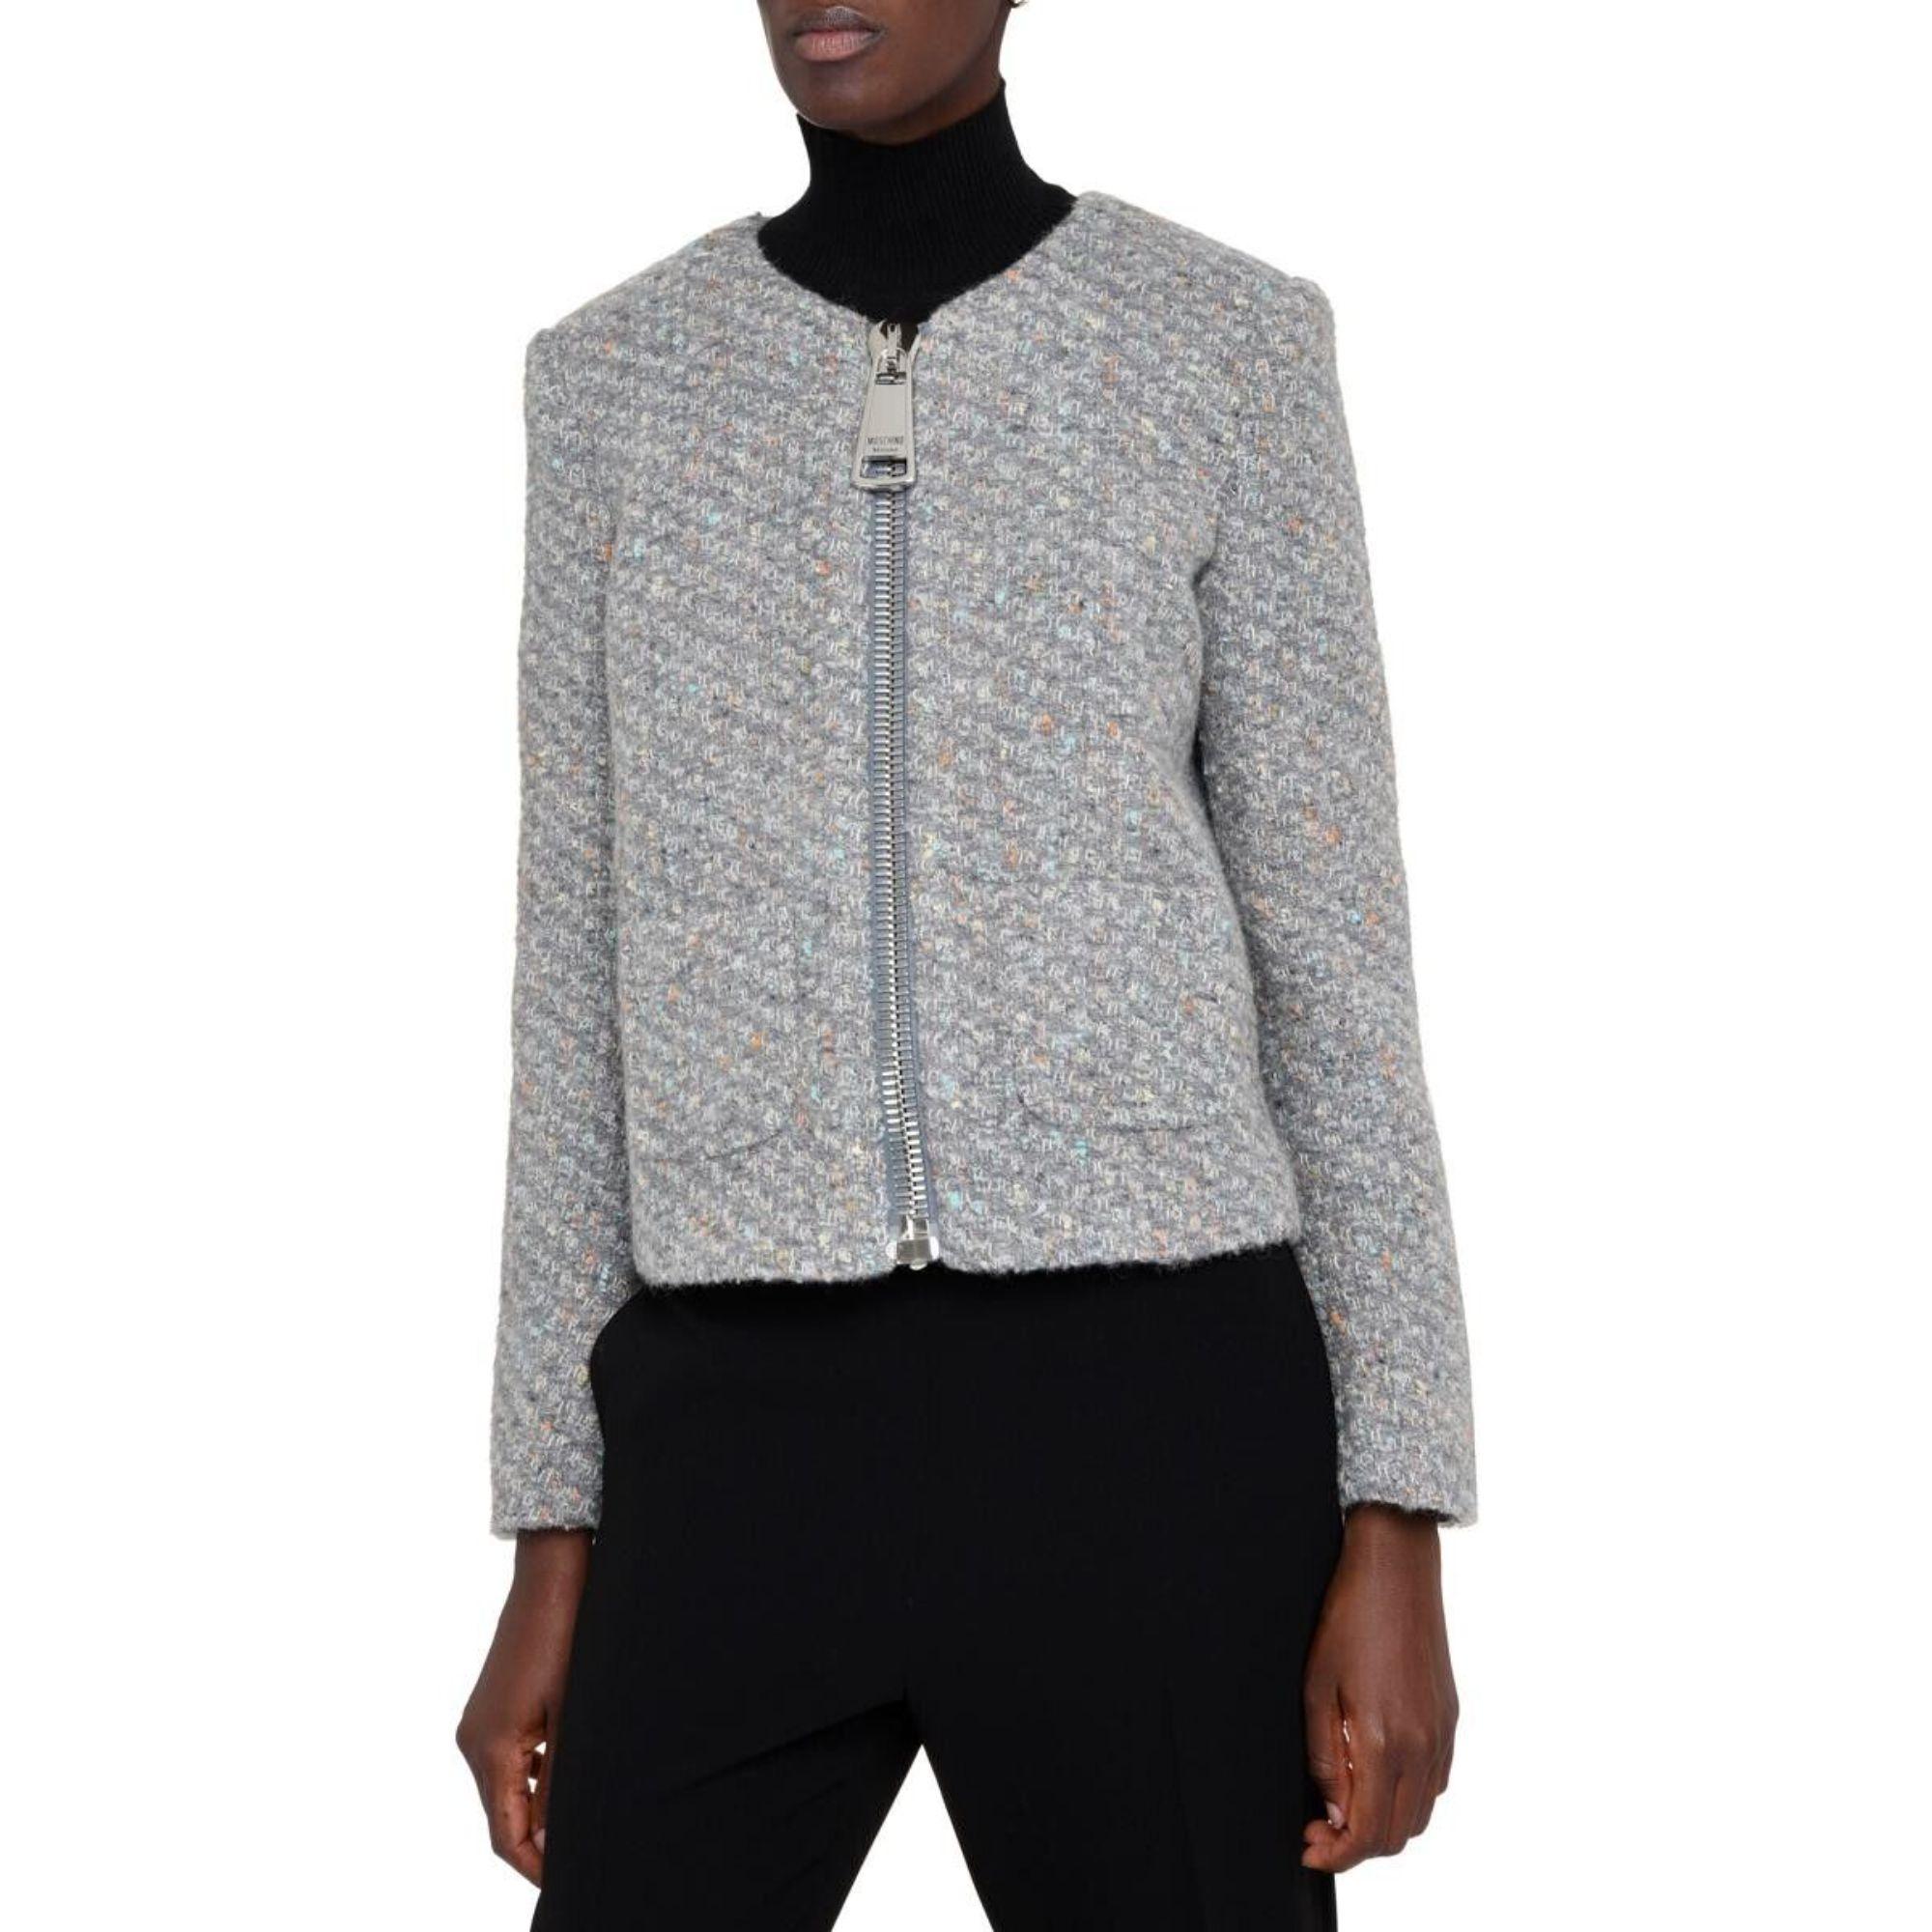 Gray AW20 Moschino Couture Boucle Wool Jacket by Jeremy Scott, Size US 10 For Sale